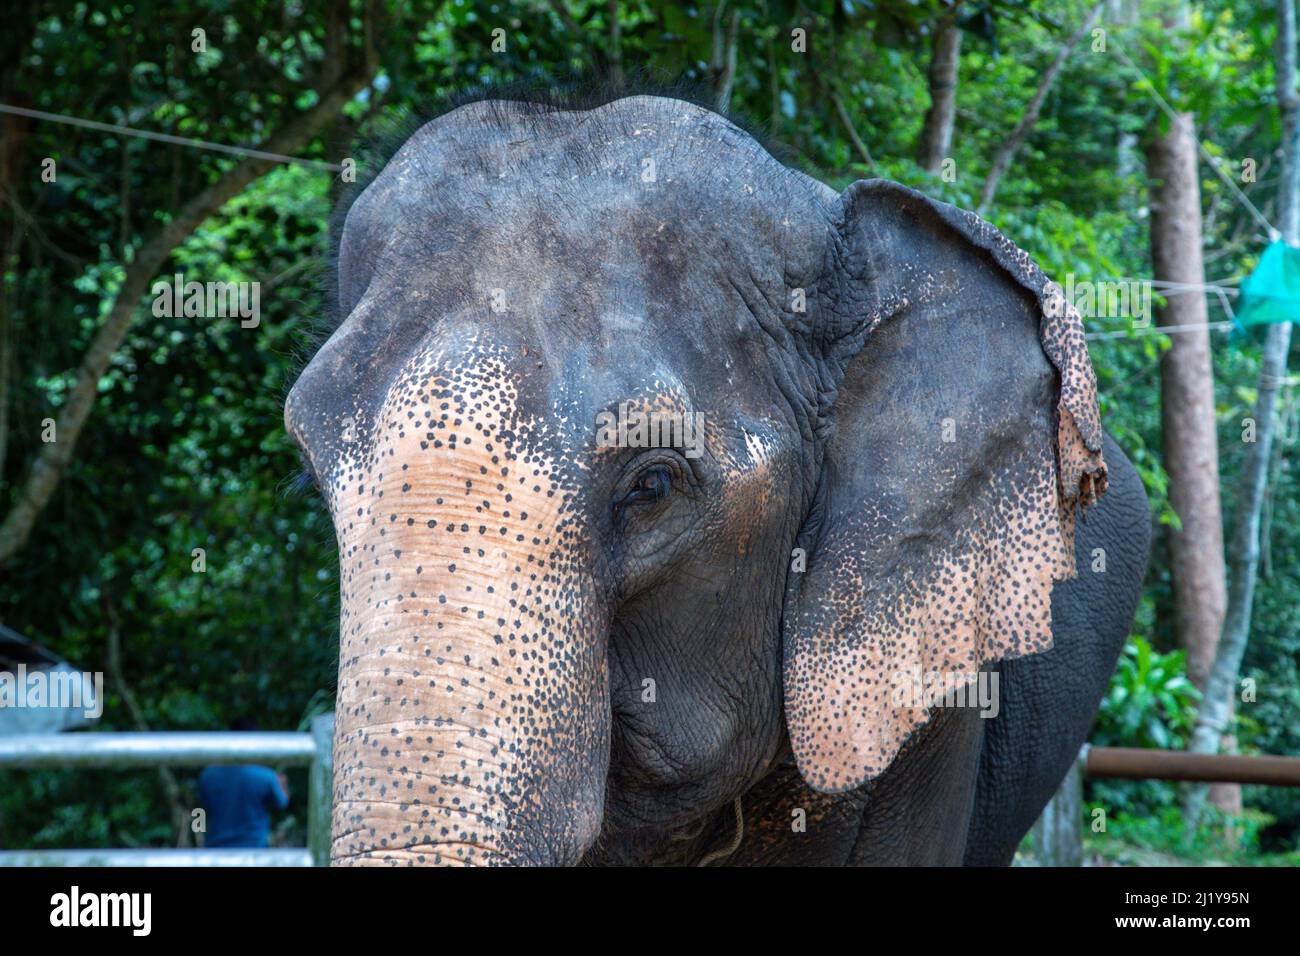 A closeup of an indian elephant's head on a background of green trees Stock Photo